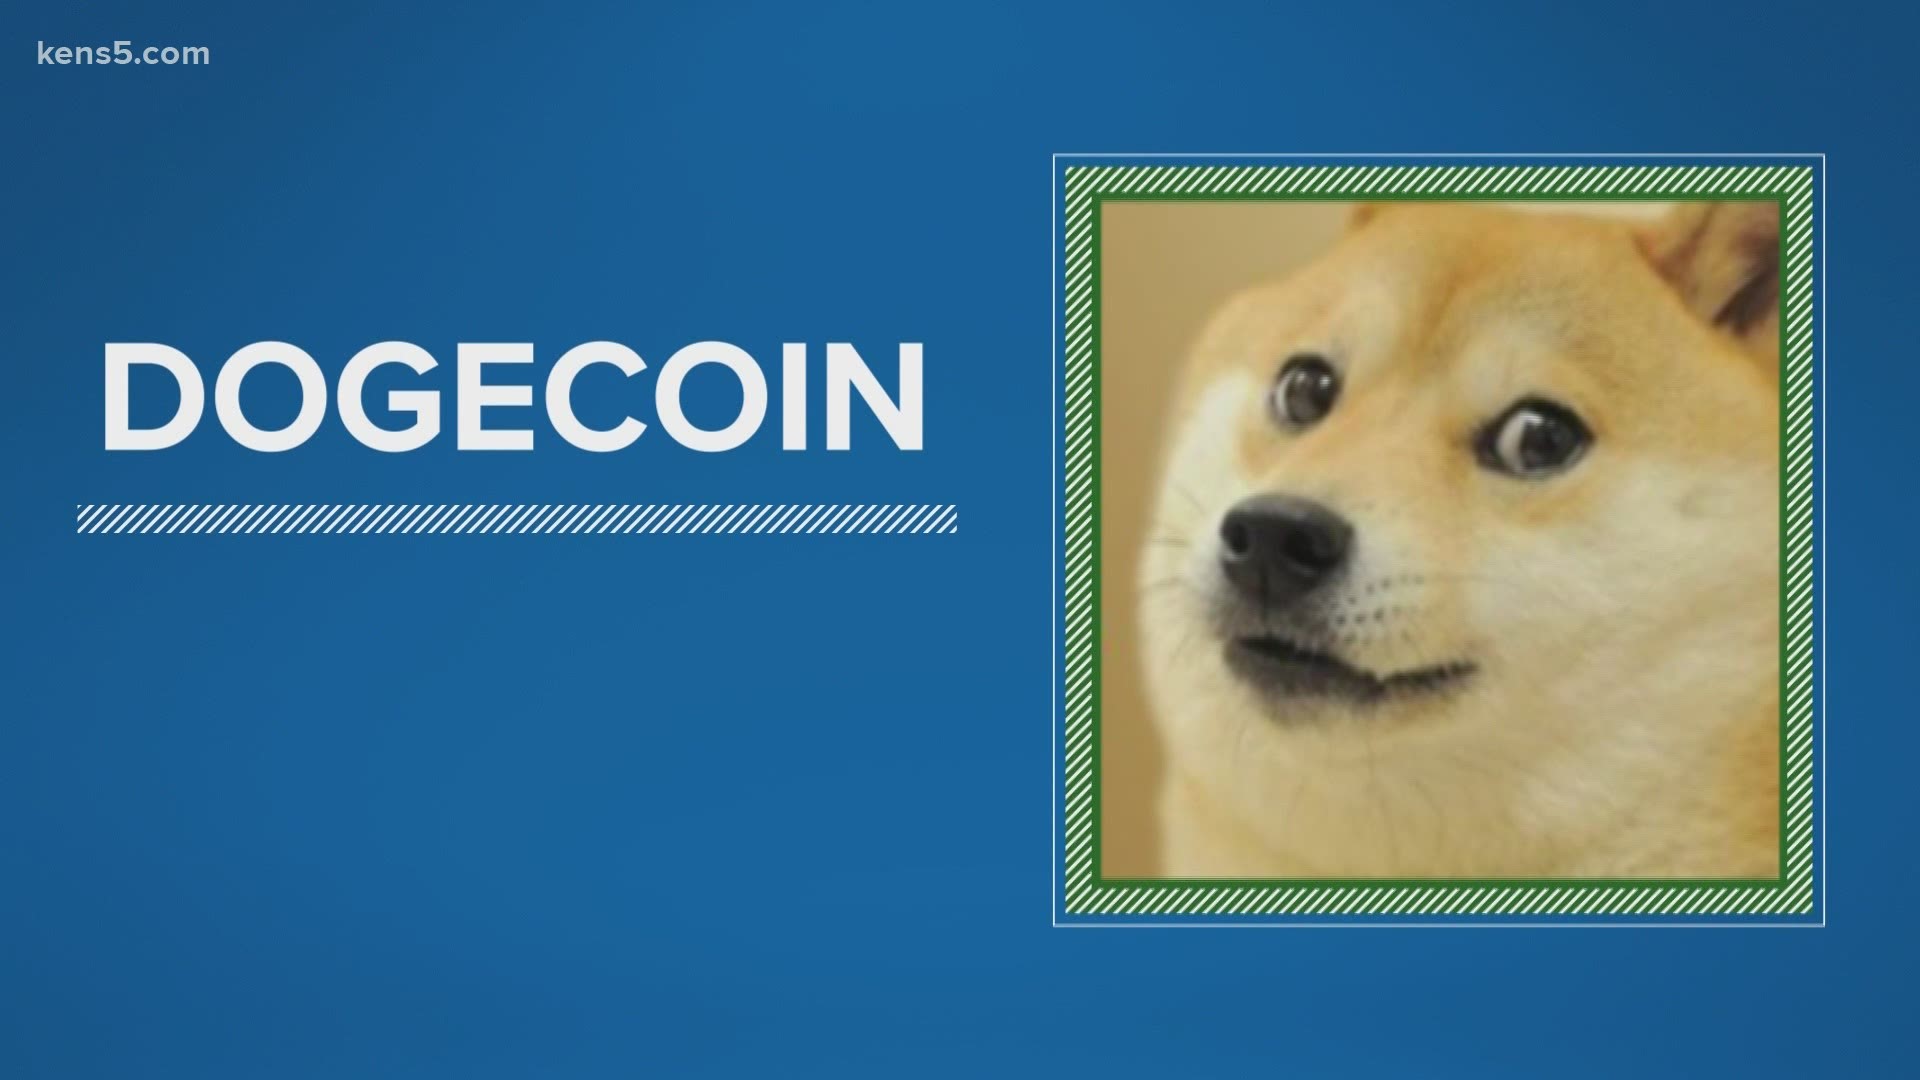 What drives the popularity and value of dogecoin? 